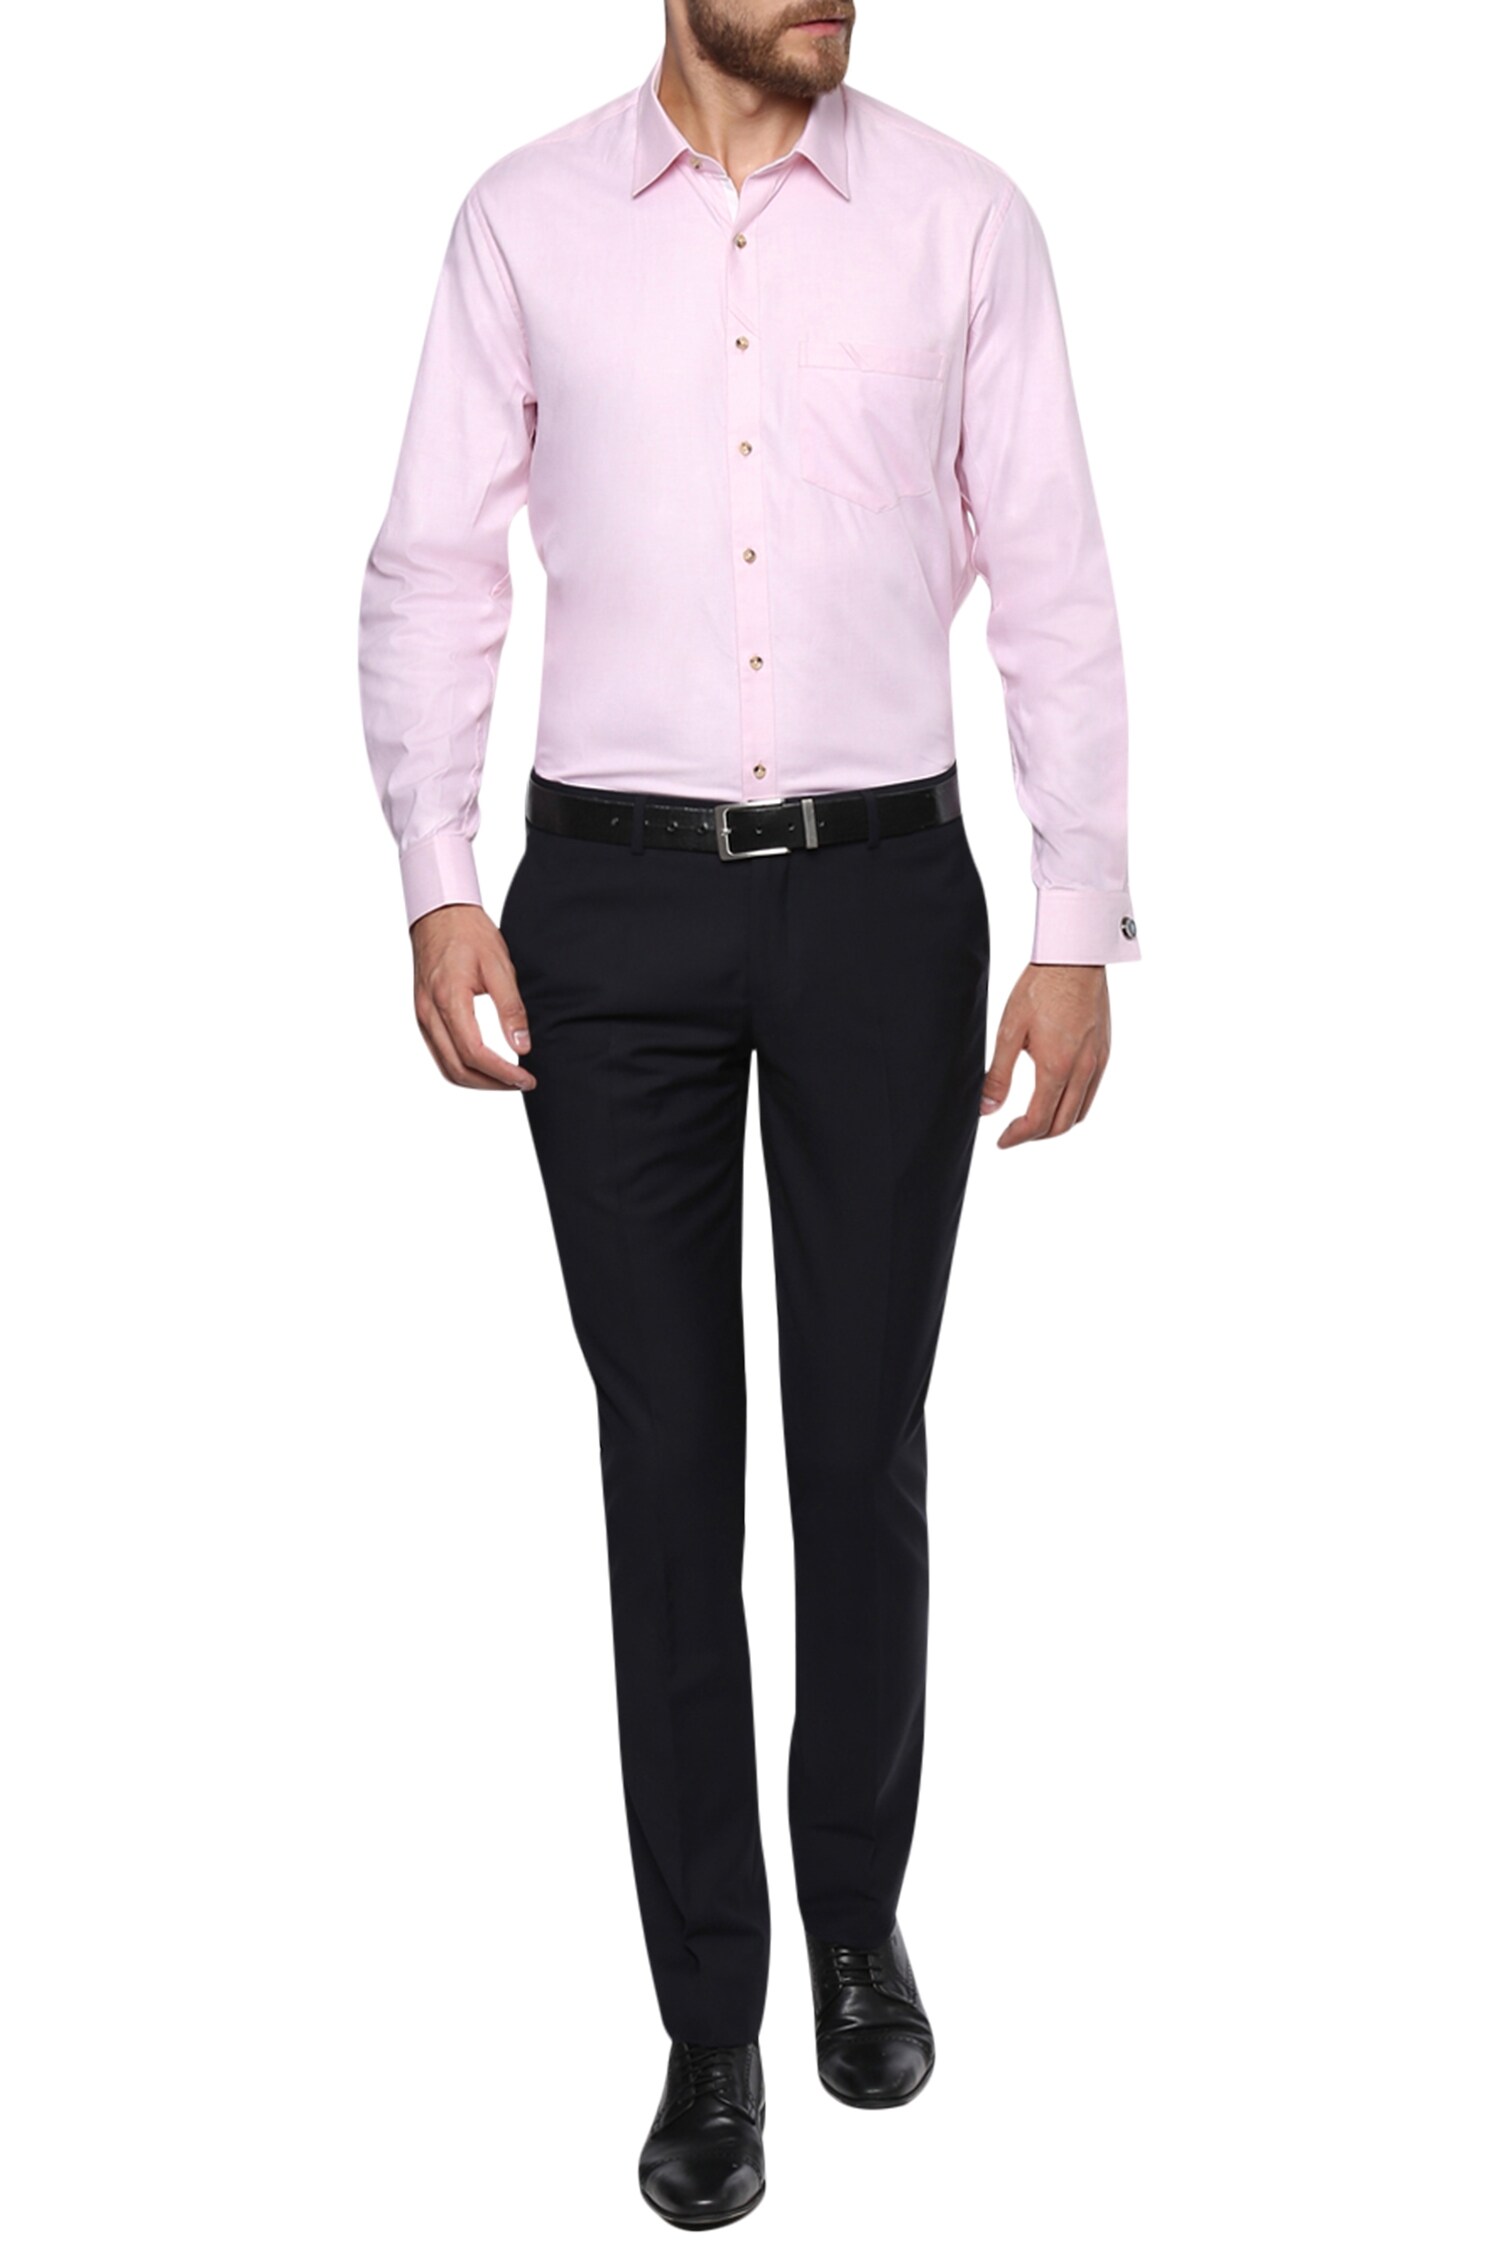 Buy Philocaly Pink Formal Button Down Dress Shirt Online | Aza Fashions